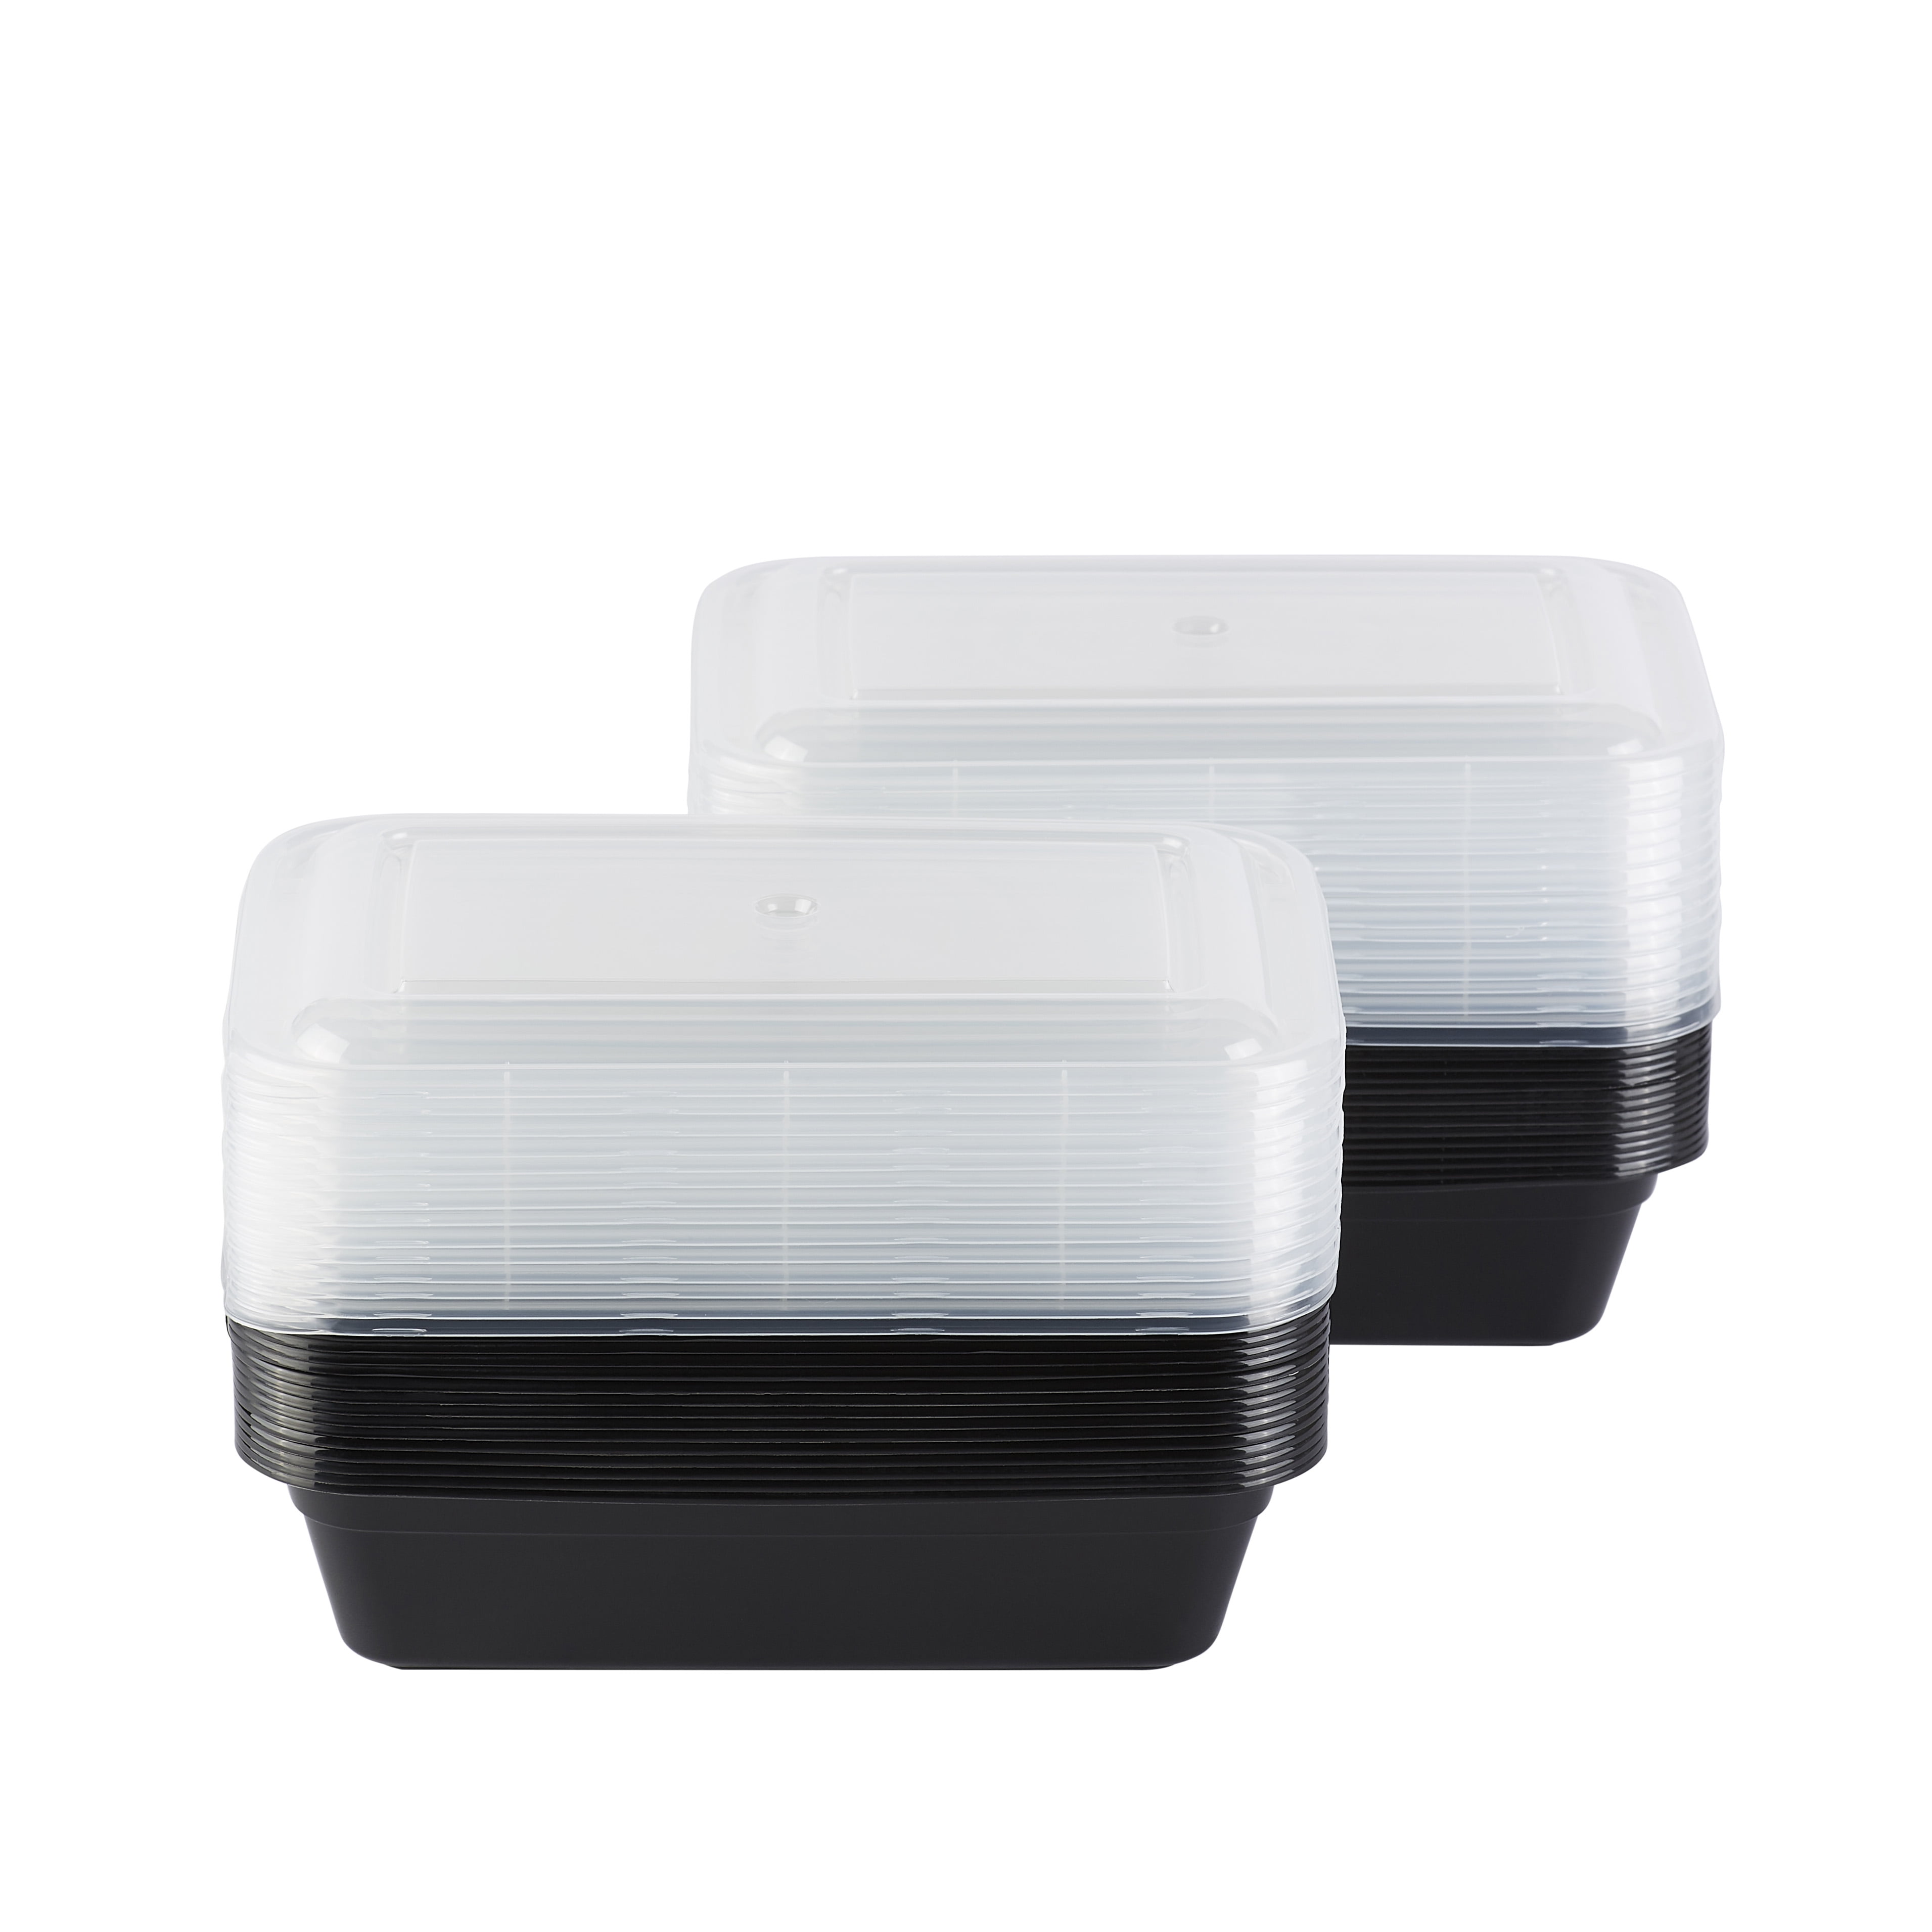 Details about   Mainstays Meal Prep Food Storage Containers 30pc Meal Planning & Portion Control 